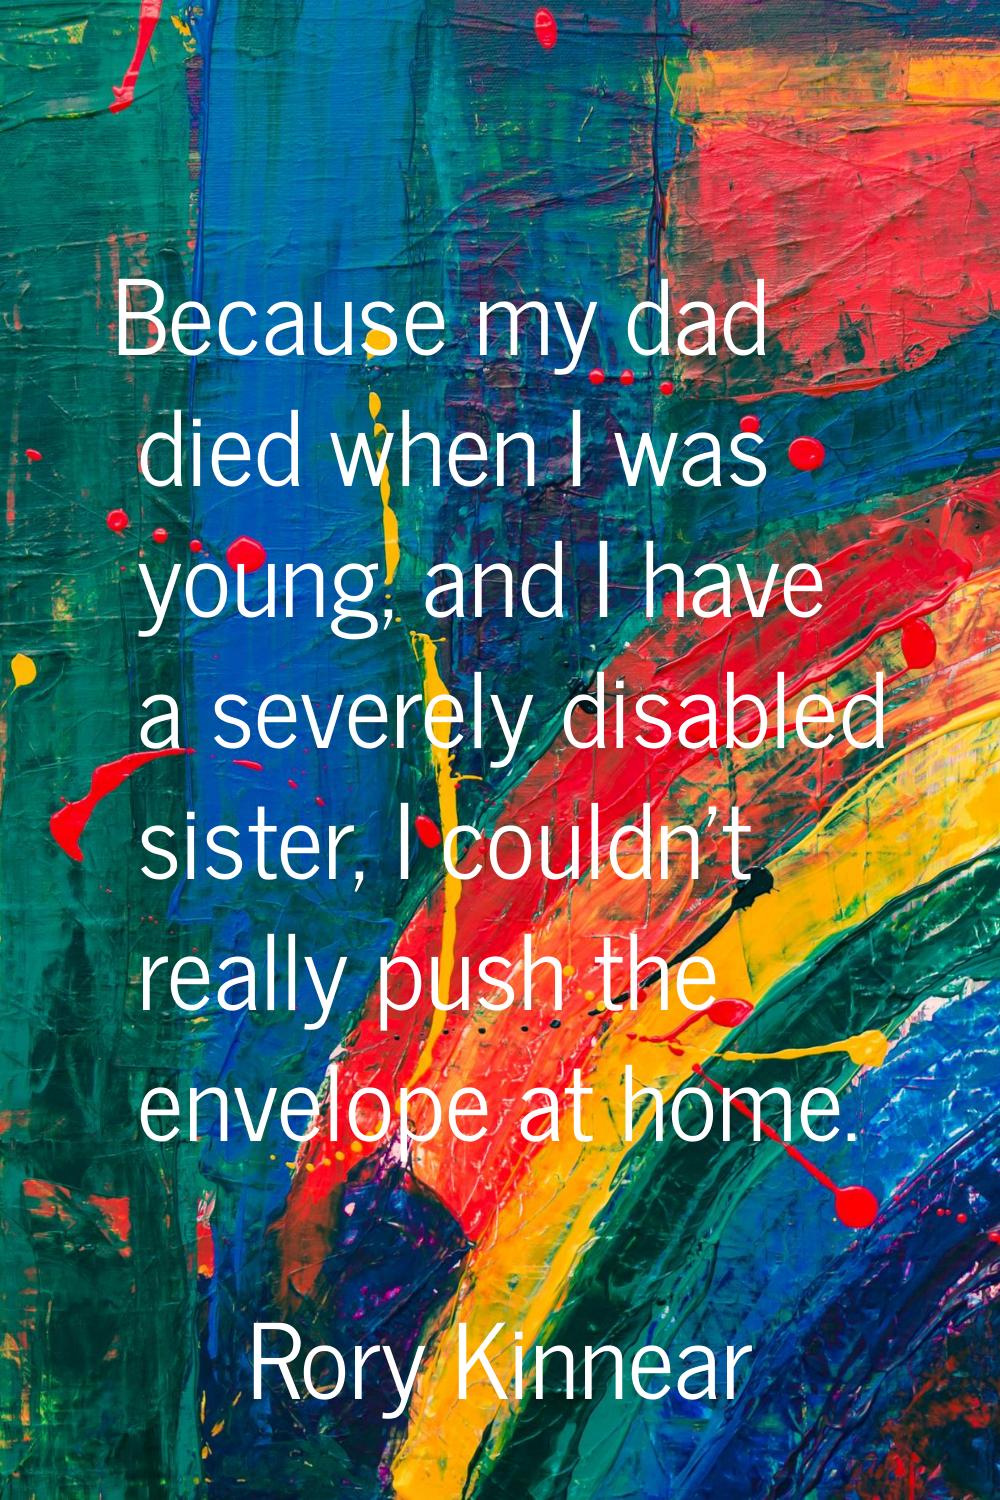 Because my dad died when I was young, and I have a severely disabled sister, I couldn't really push